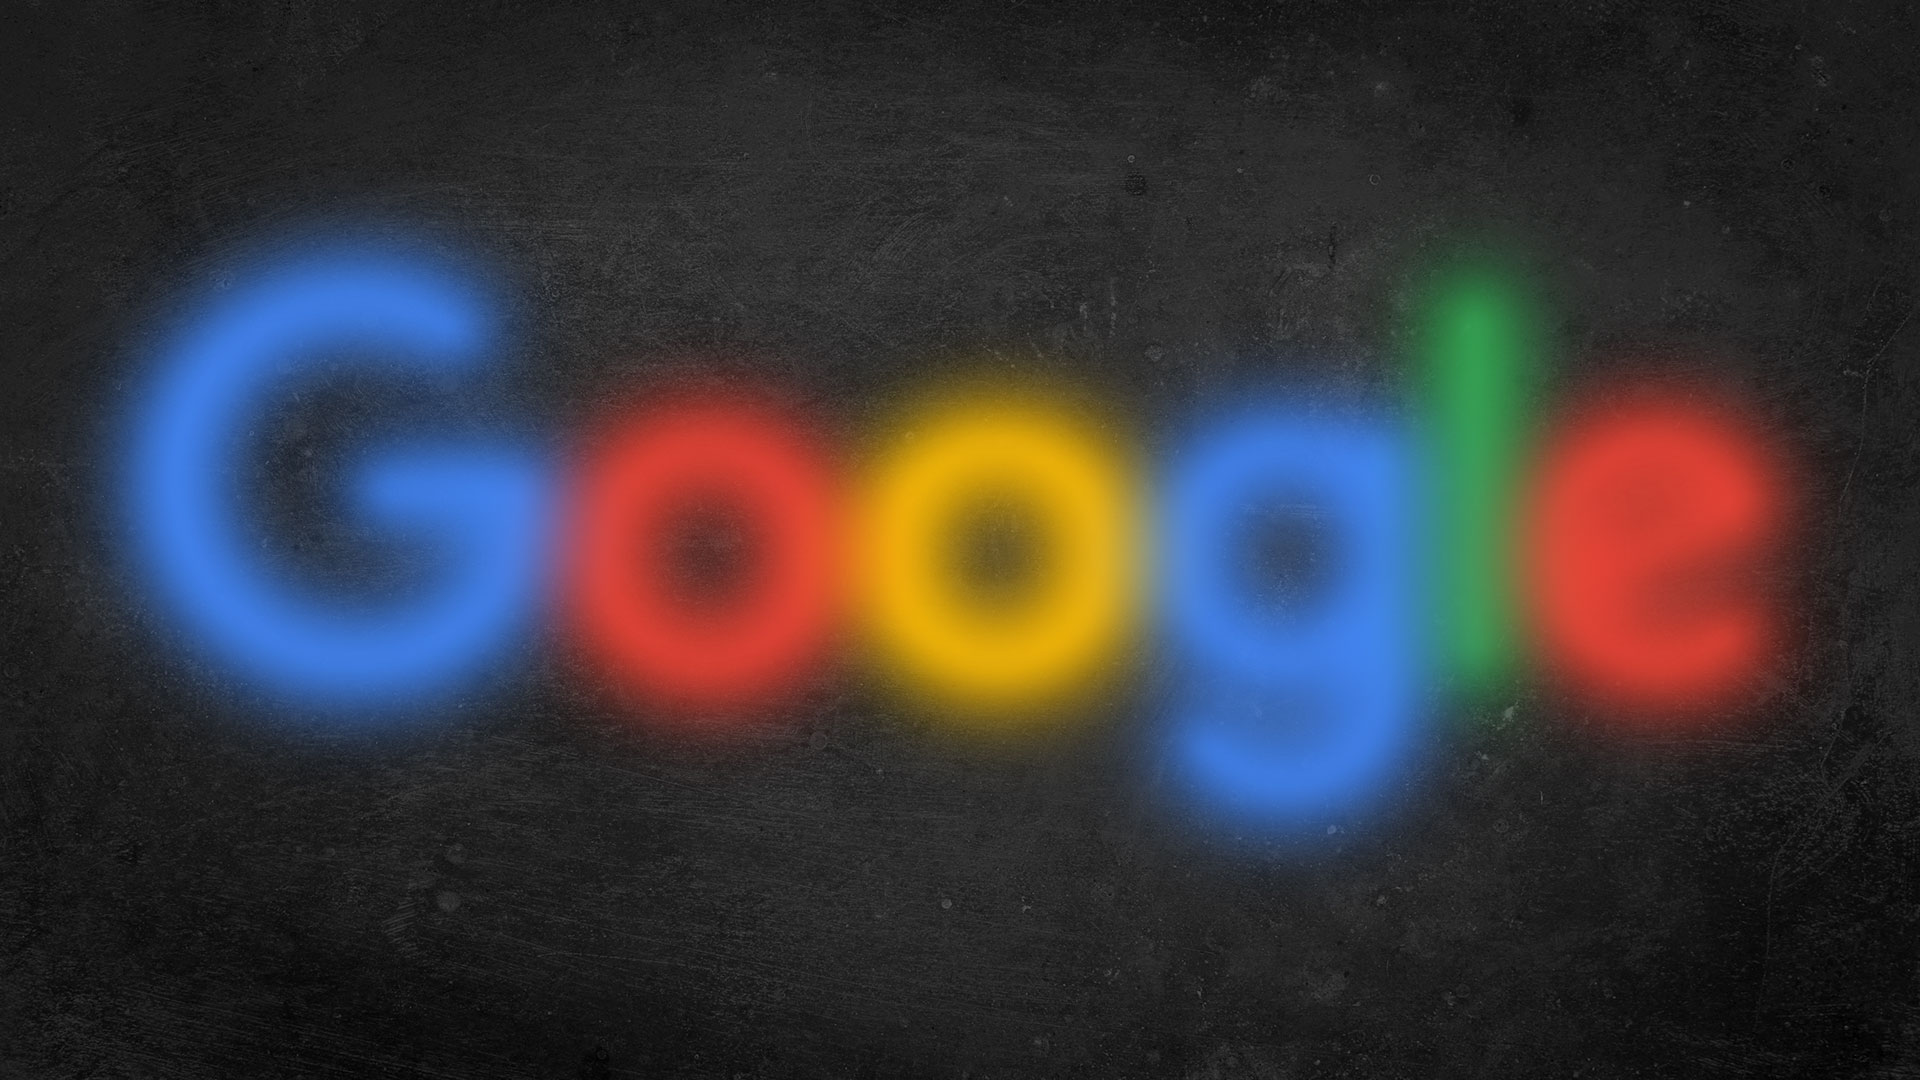 Google will soon default to blurring explicit image search results